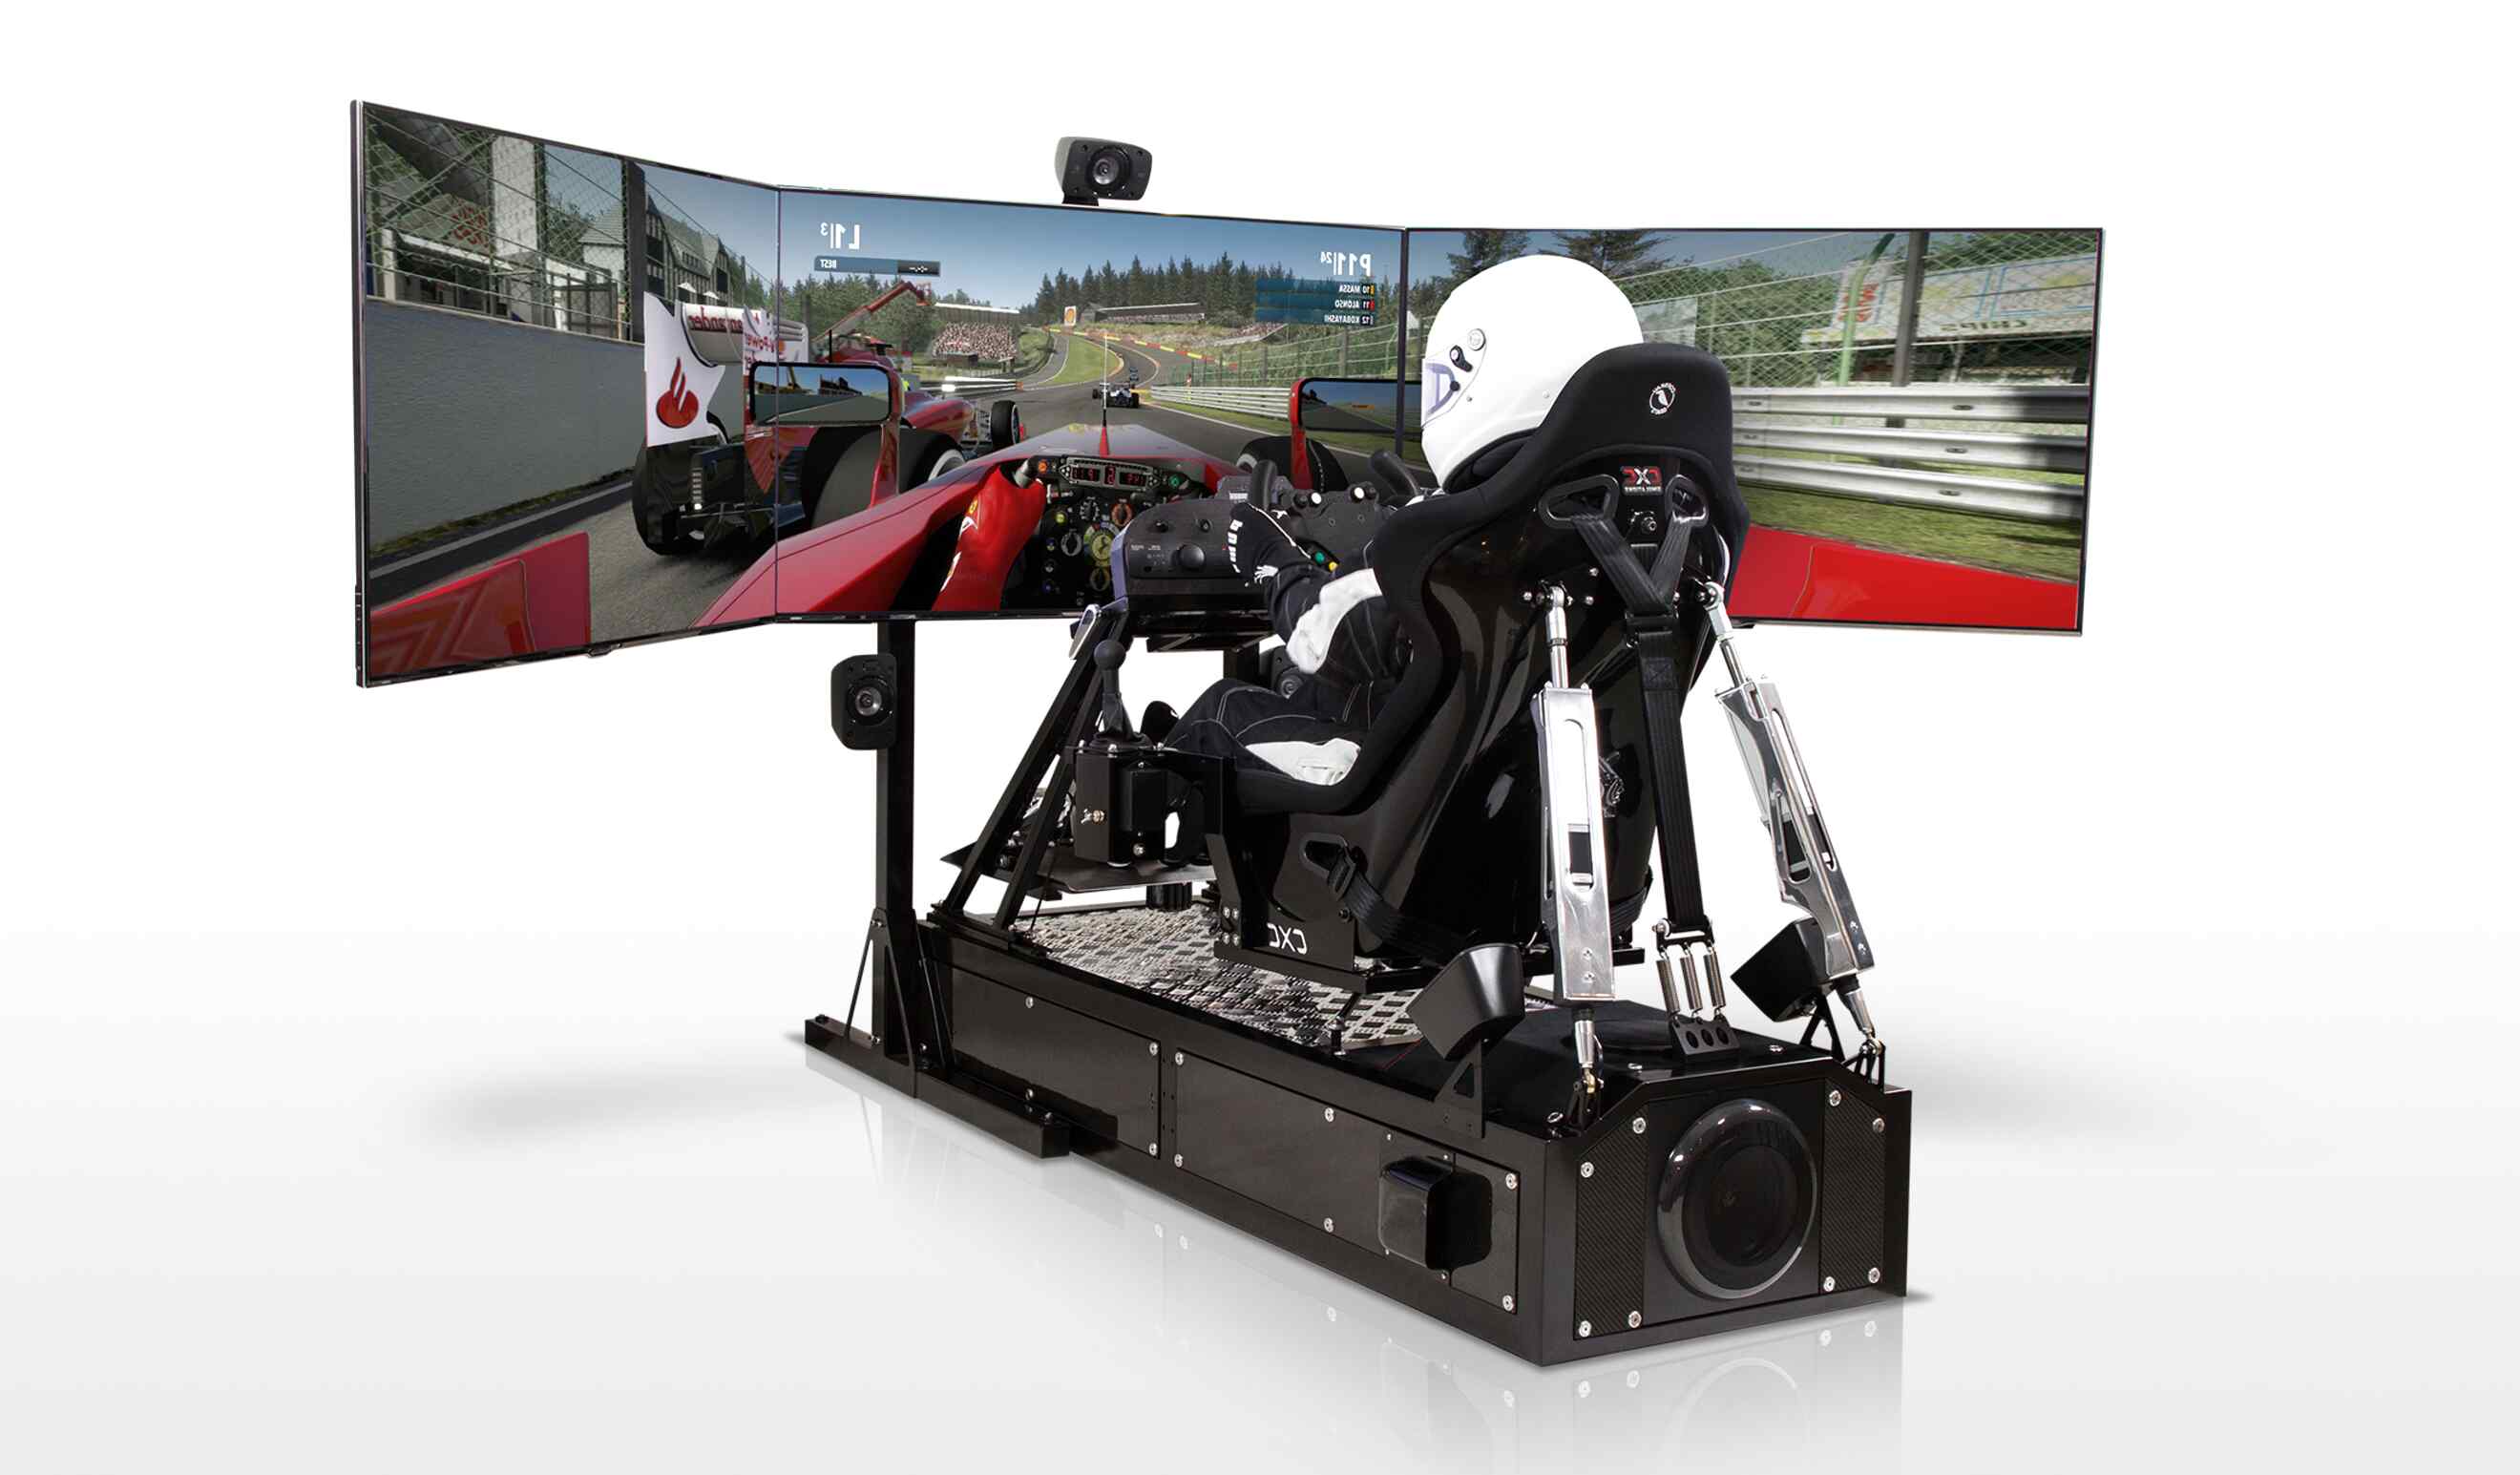 instal the new version for iphoneFlying Car Racing Simulator